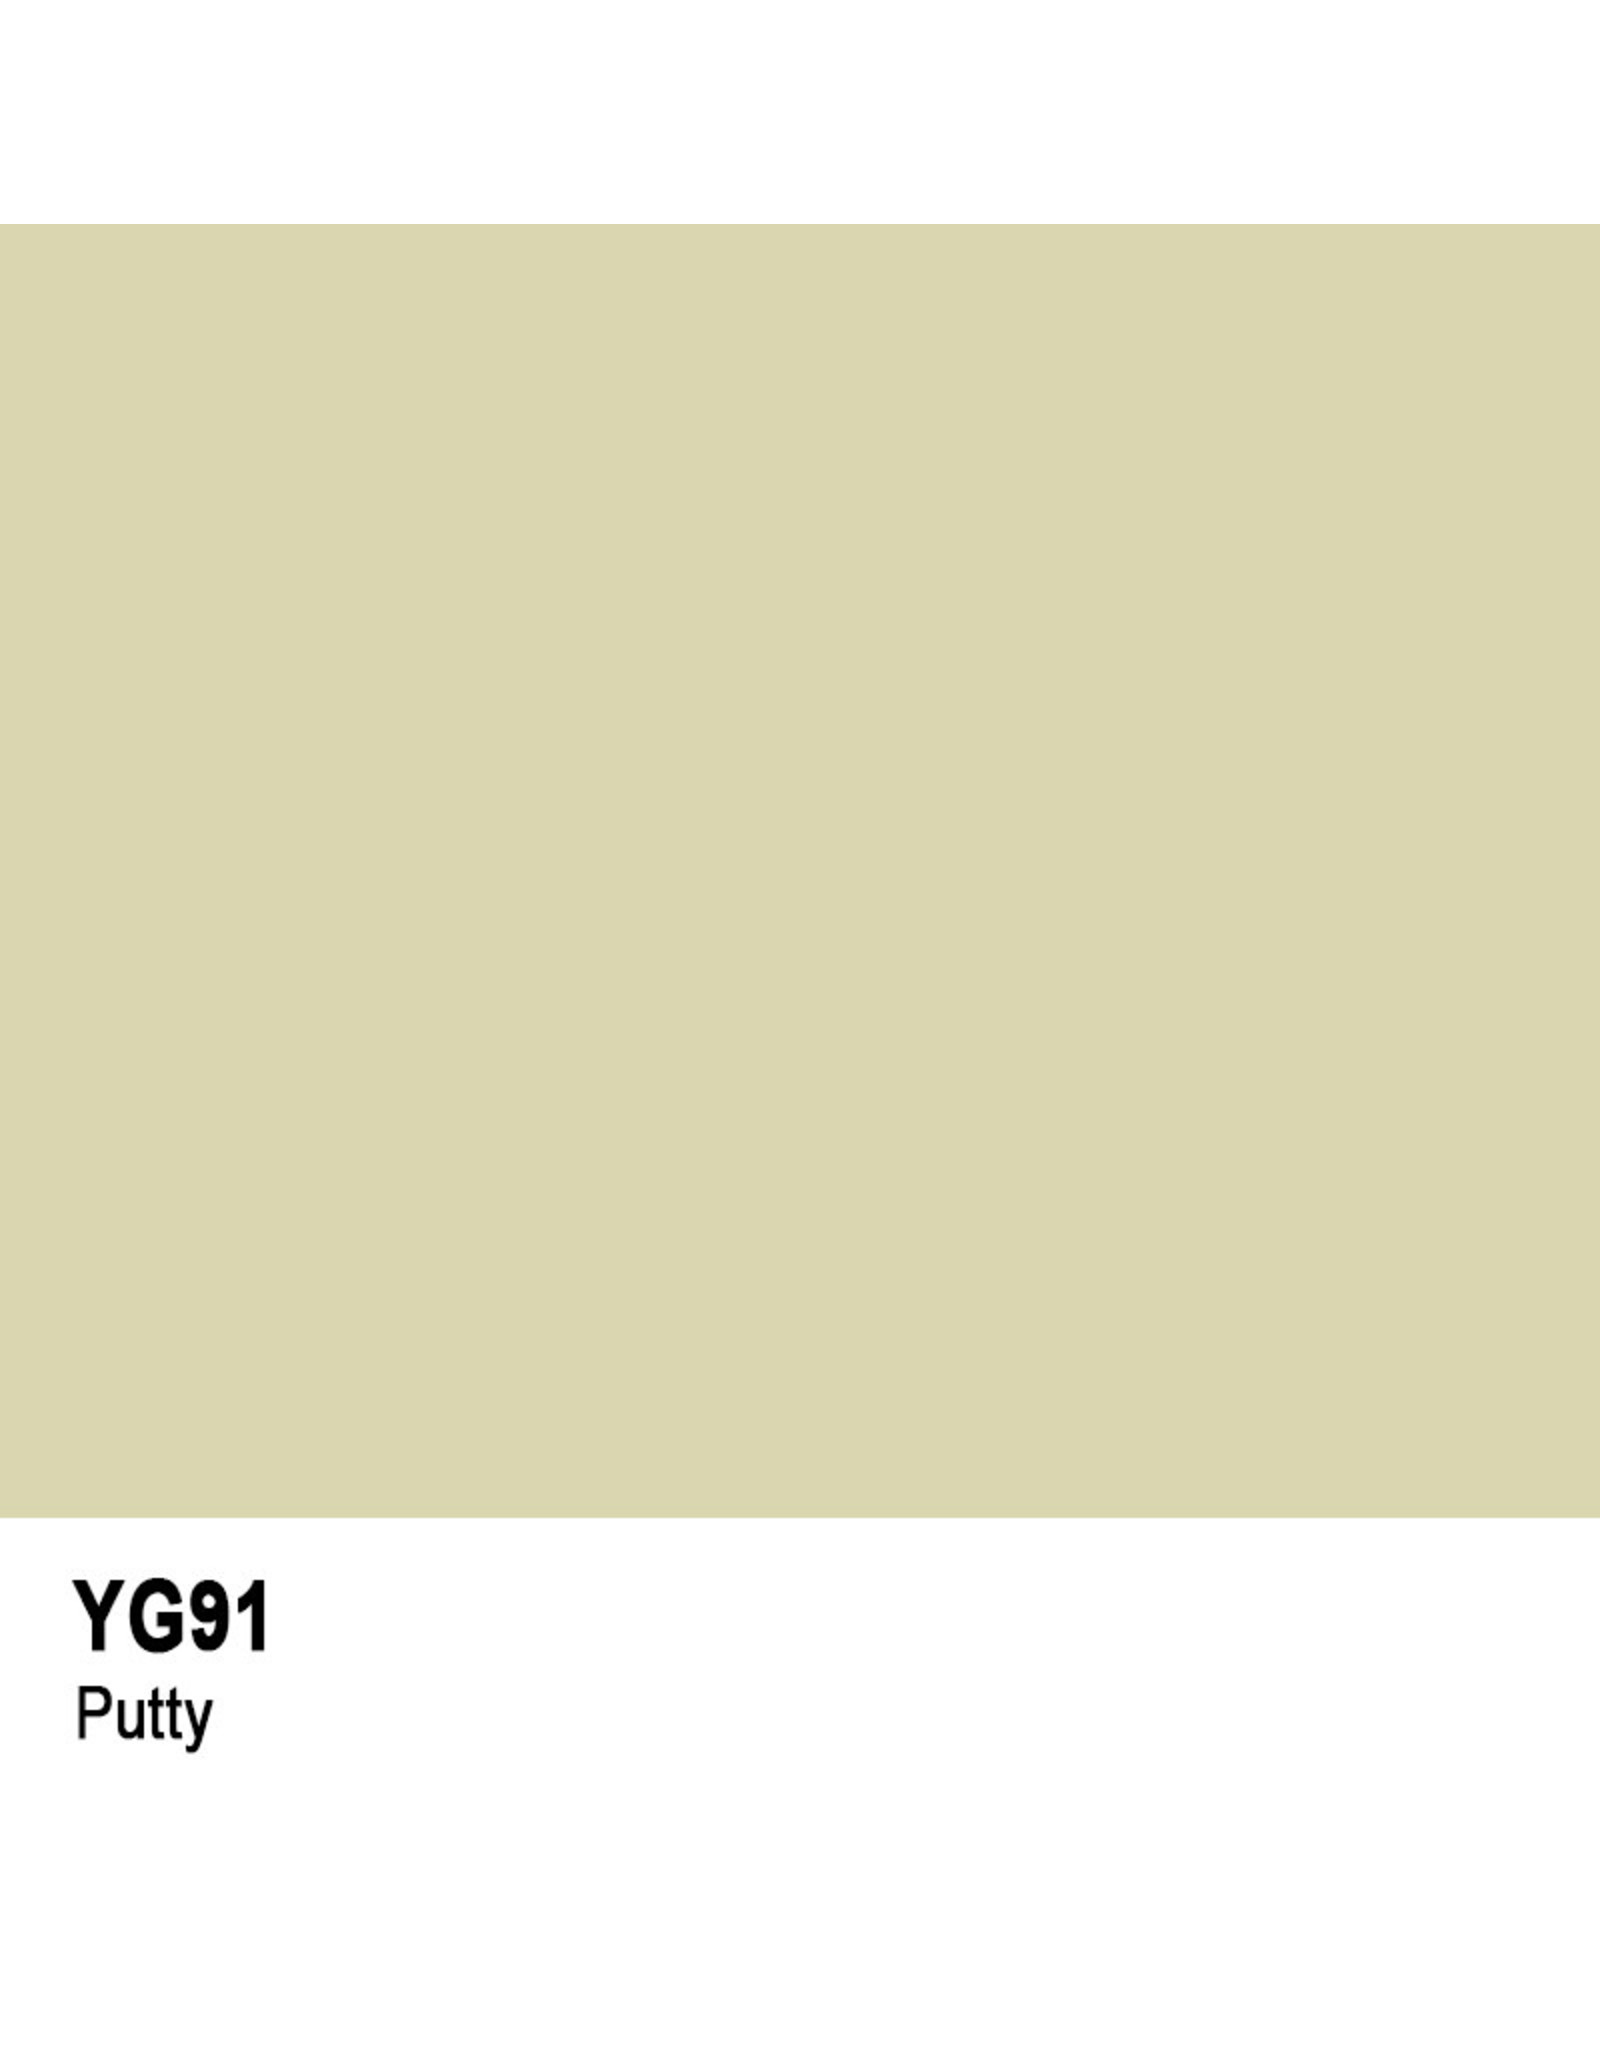 COPIC COPIC YG91 PUTTY SKETCH MARKER